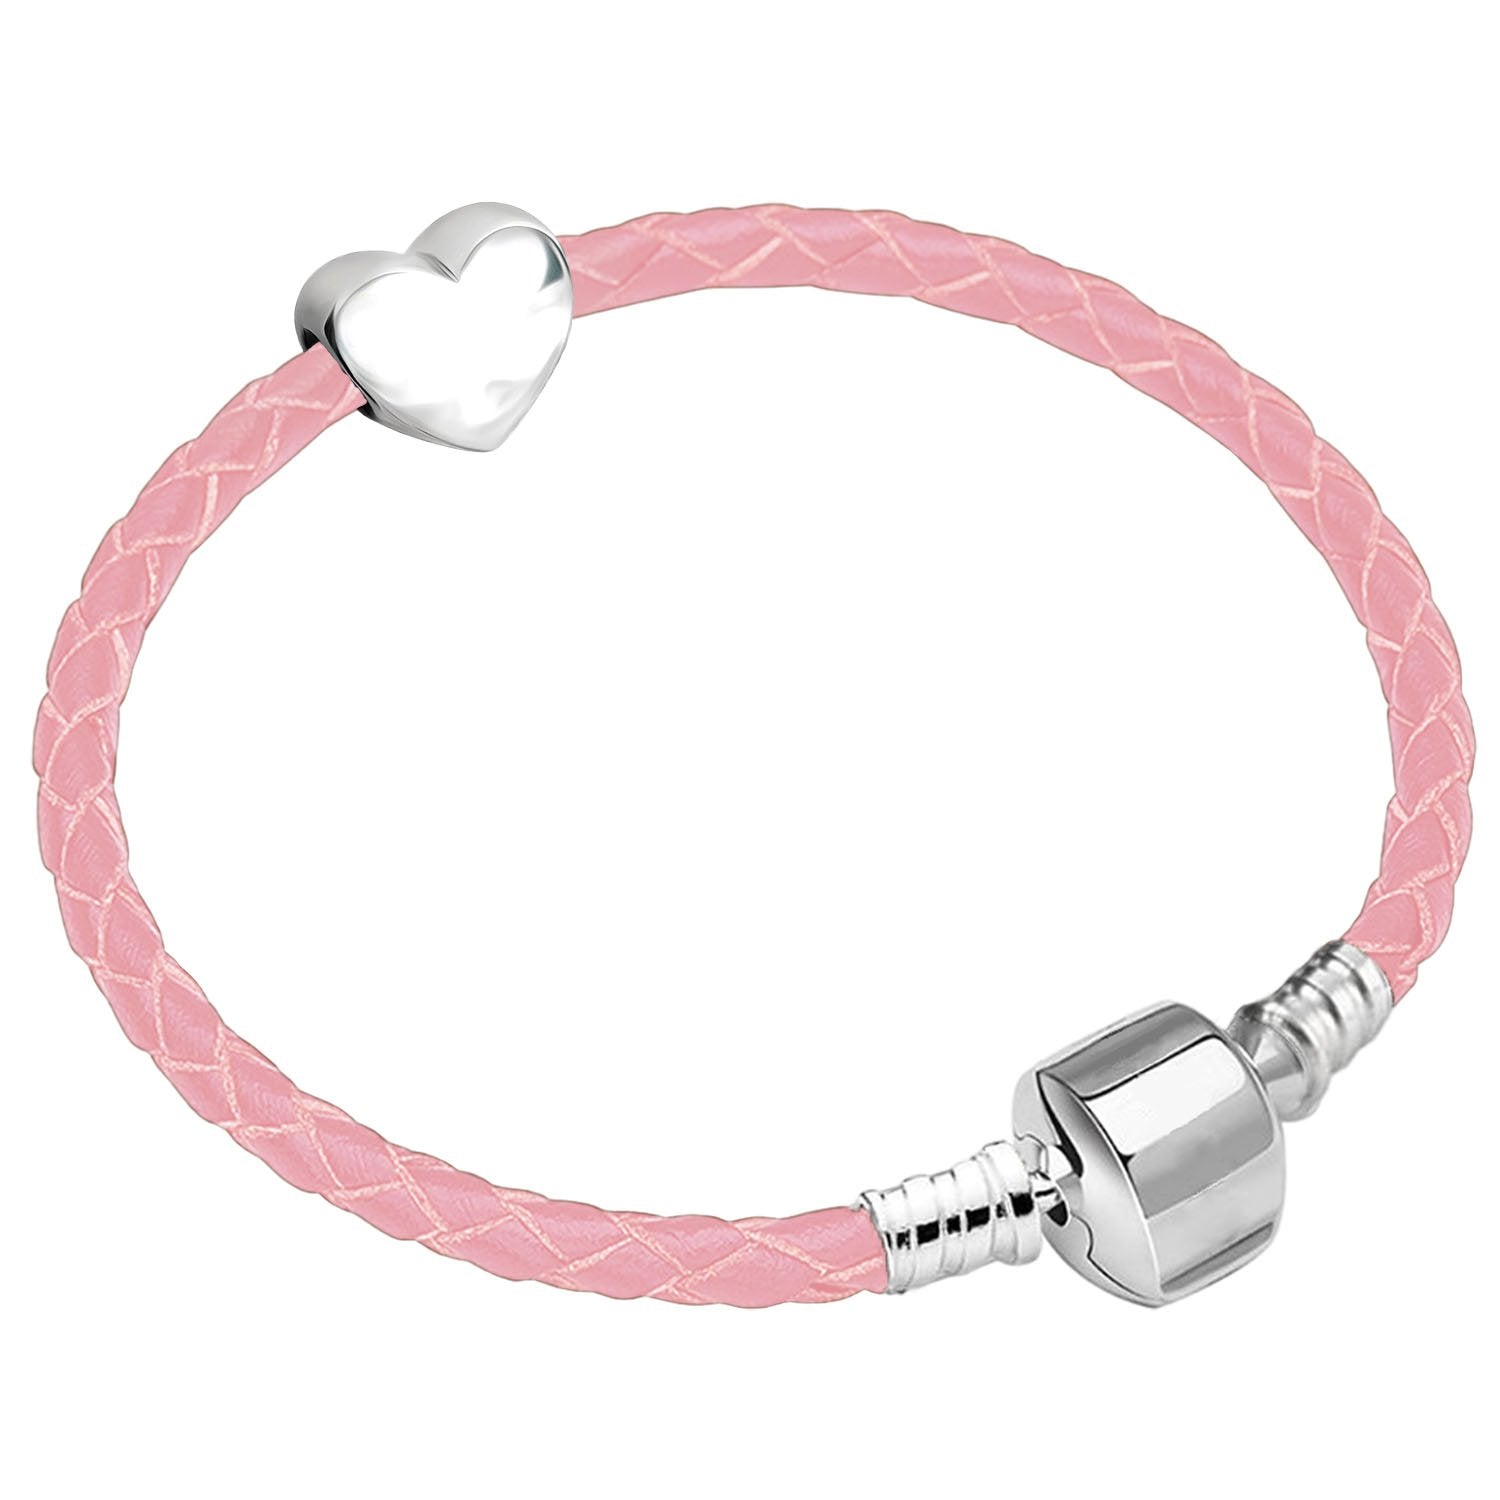 16cm Girls Leather Starter Charm Bracelet with Silver Heart and Gift Box for Age 4-7 Years